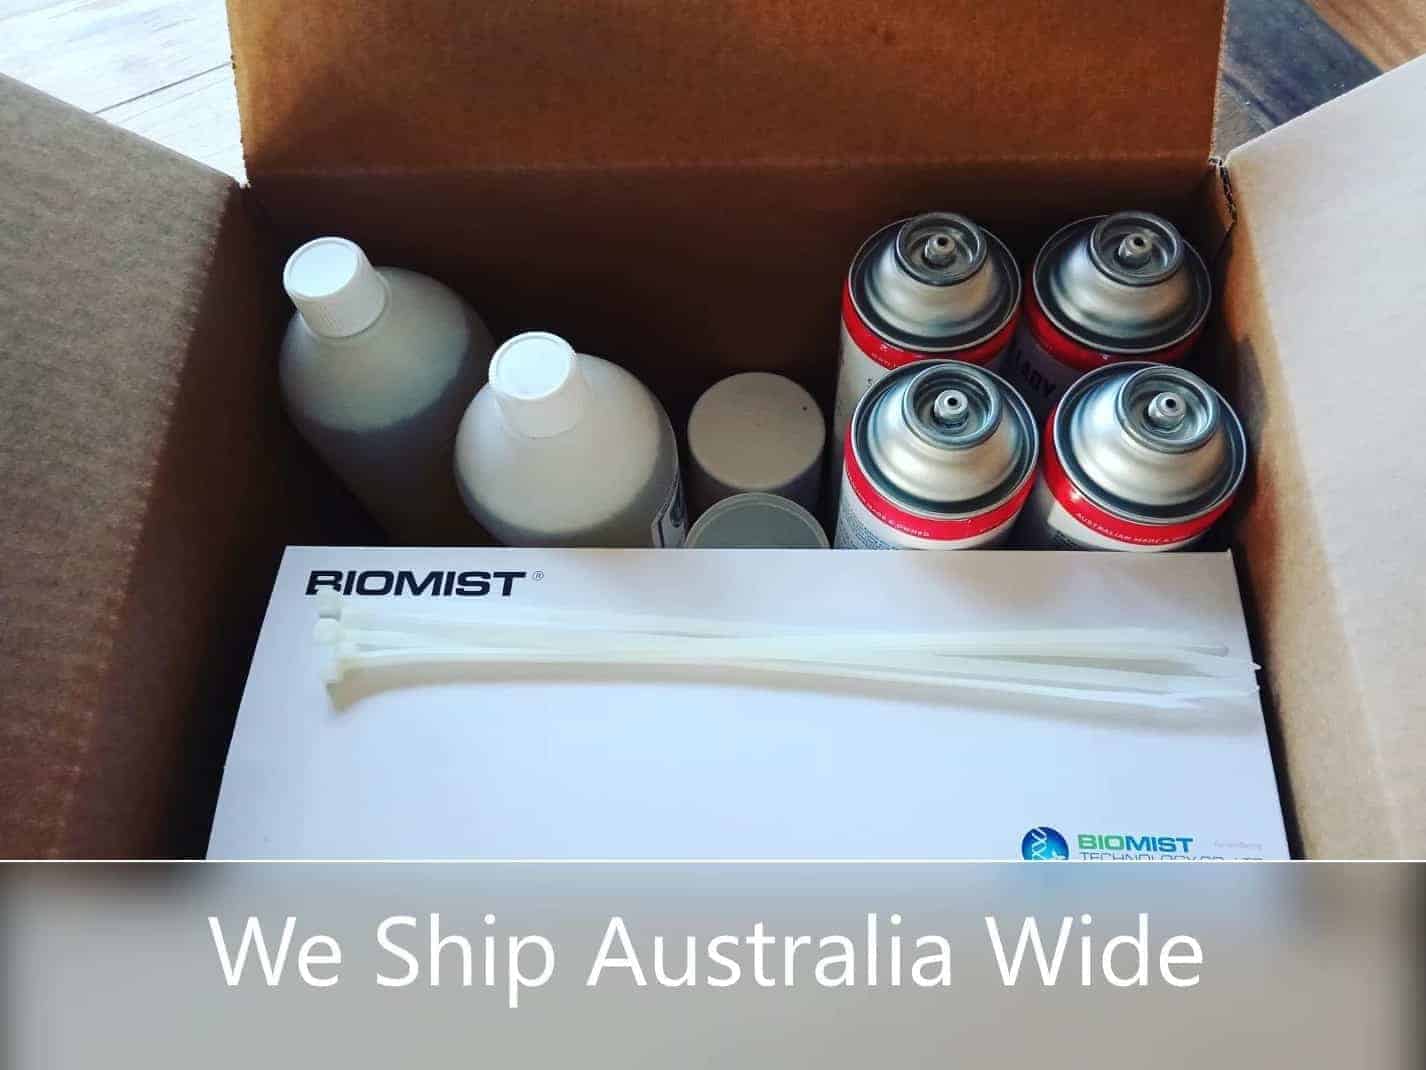 Restaurant Fly Control packed and ready to ship Australia wide